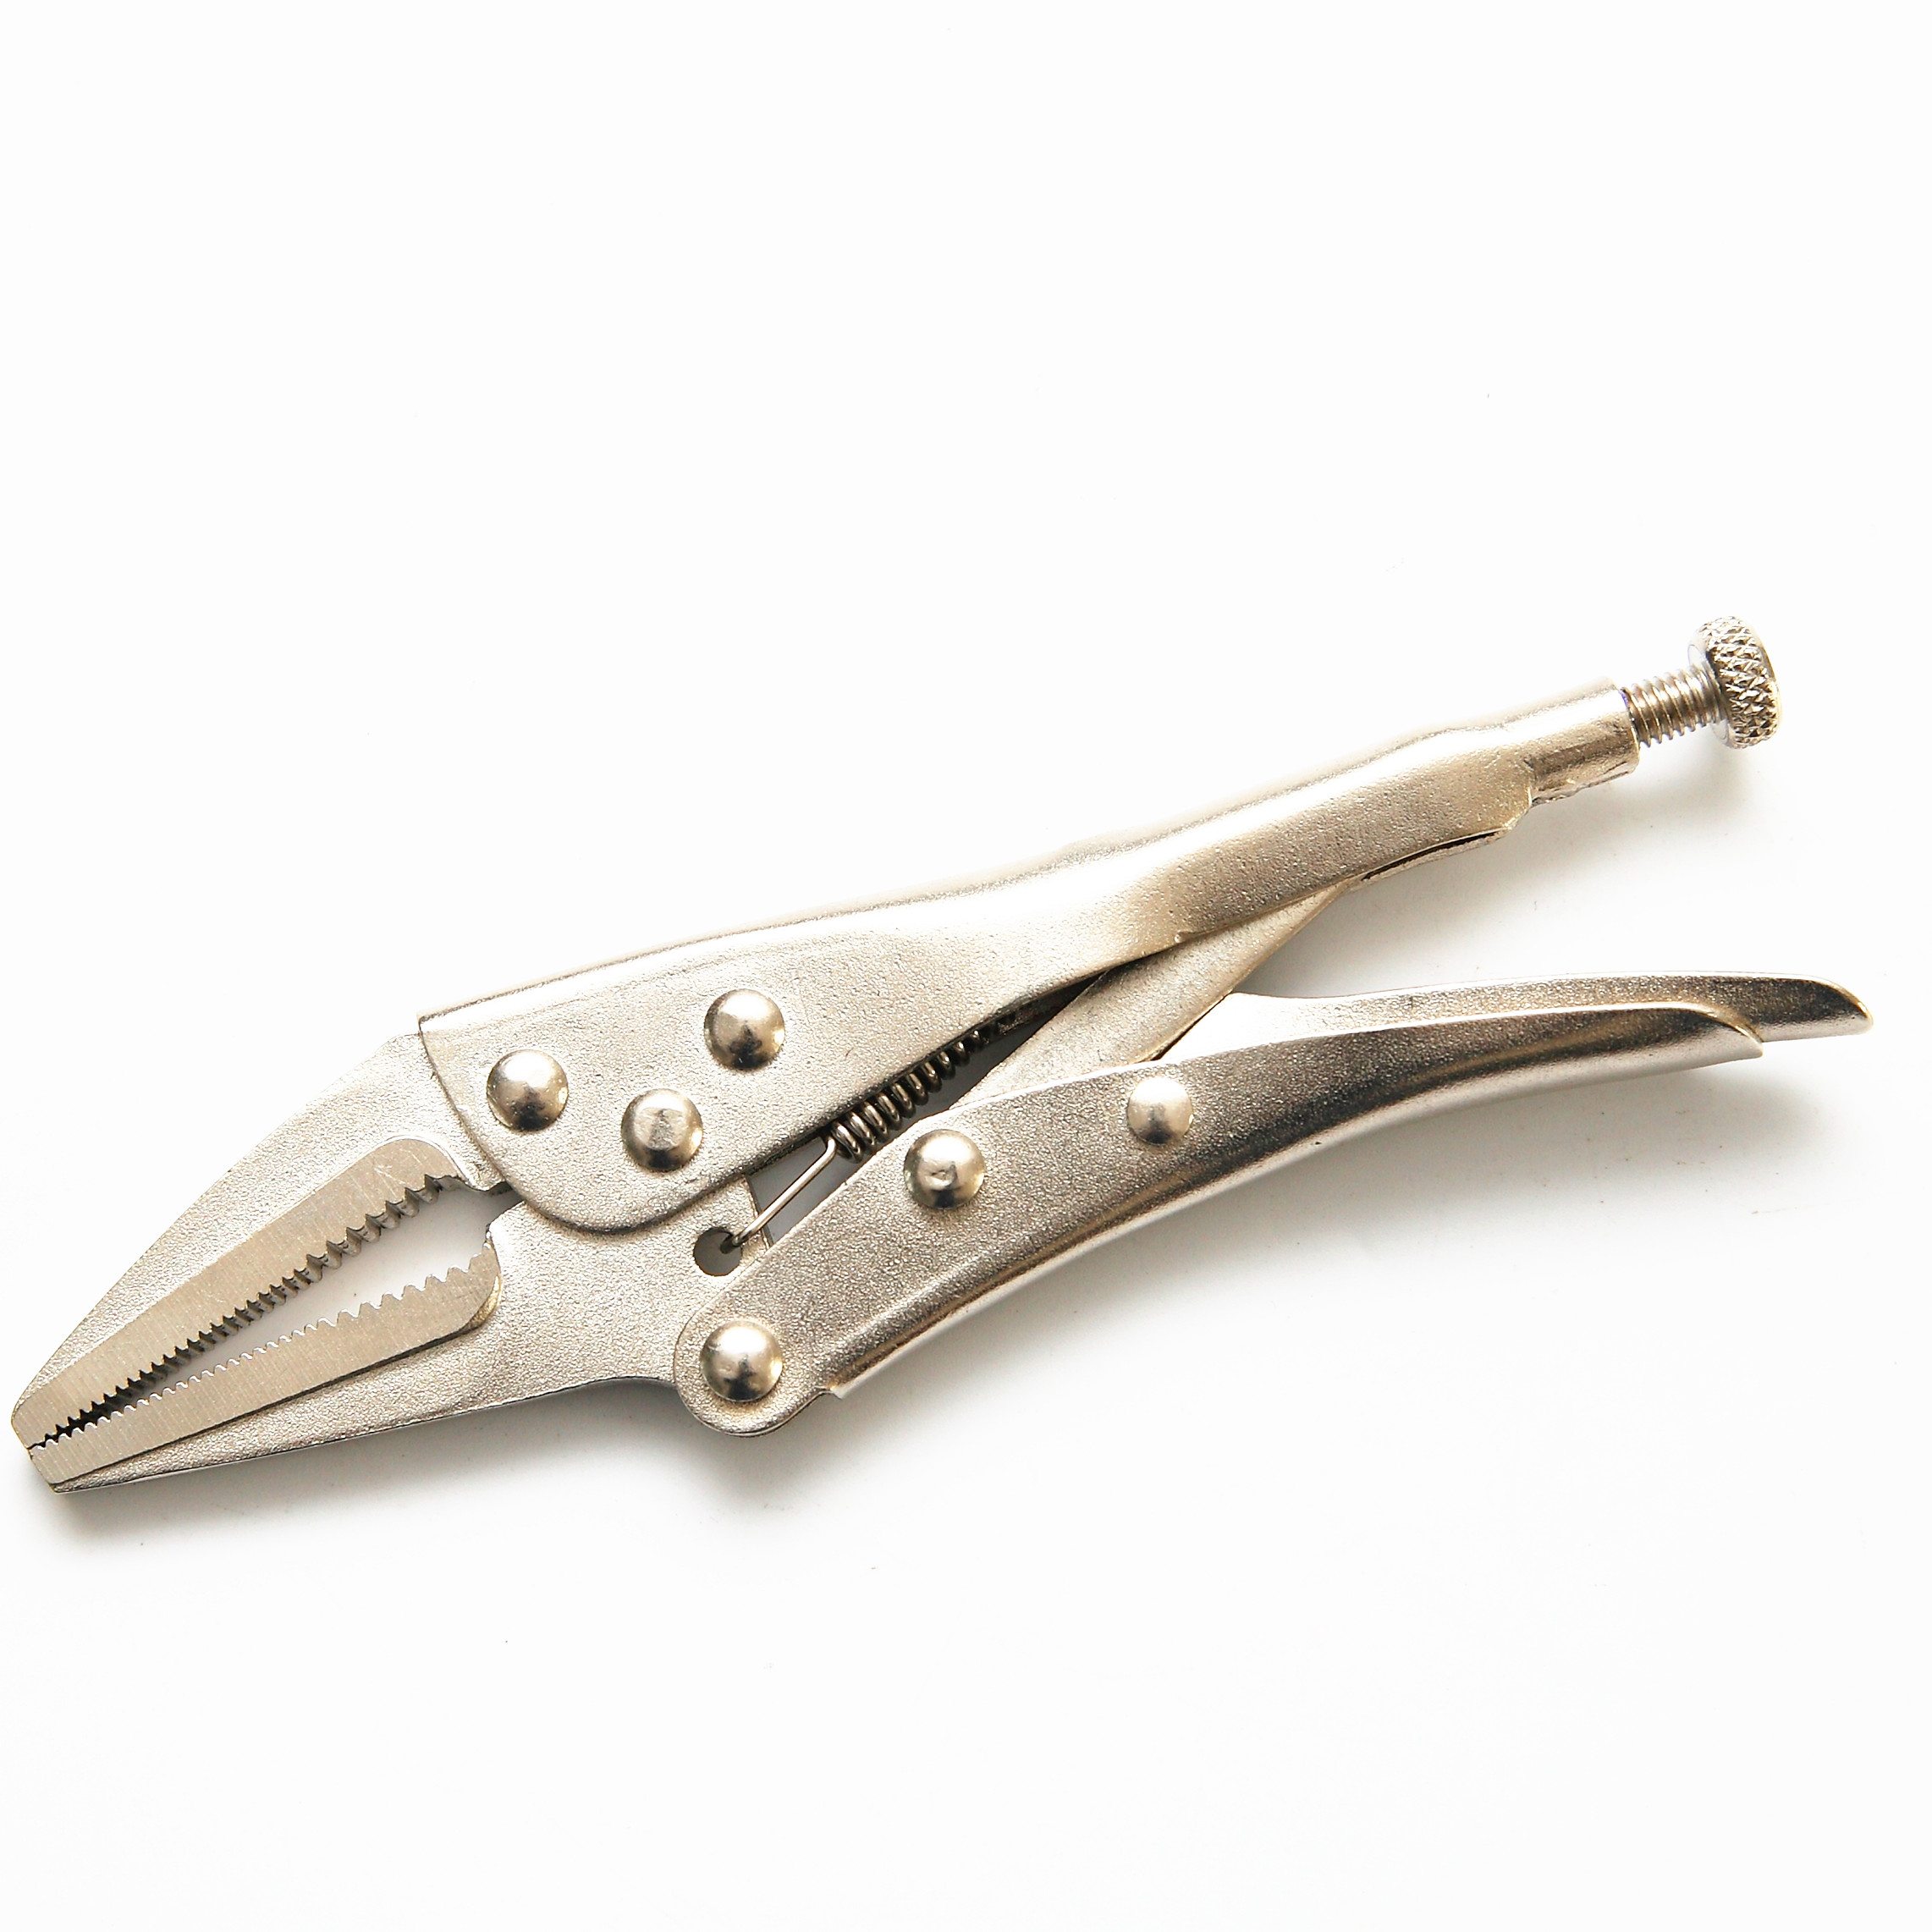 6.5″ Forehand Long nose Locking Pliers